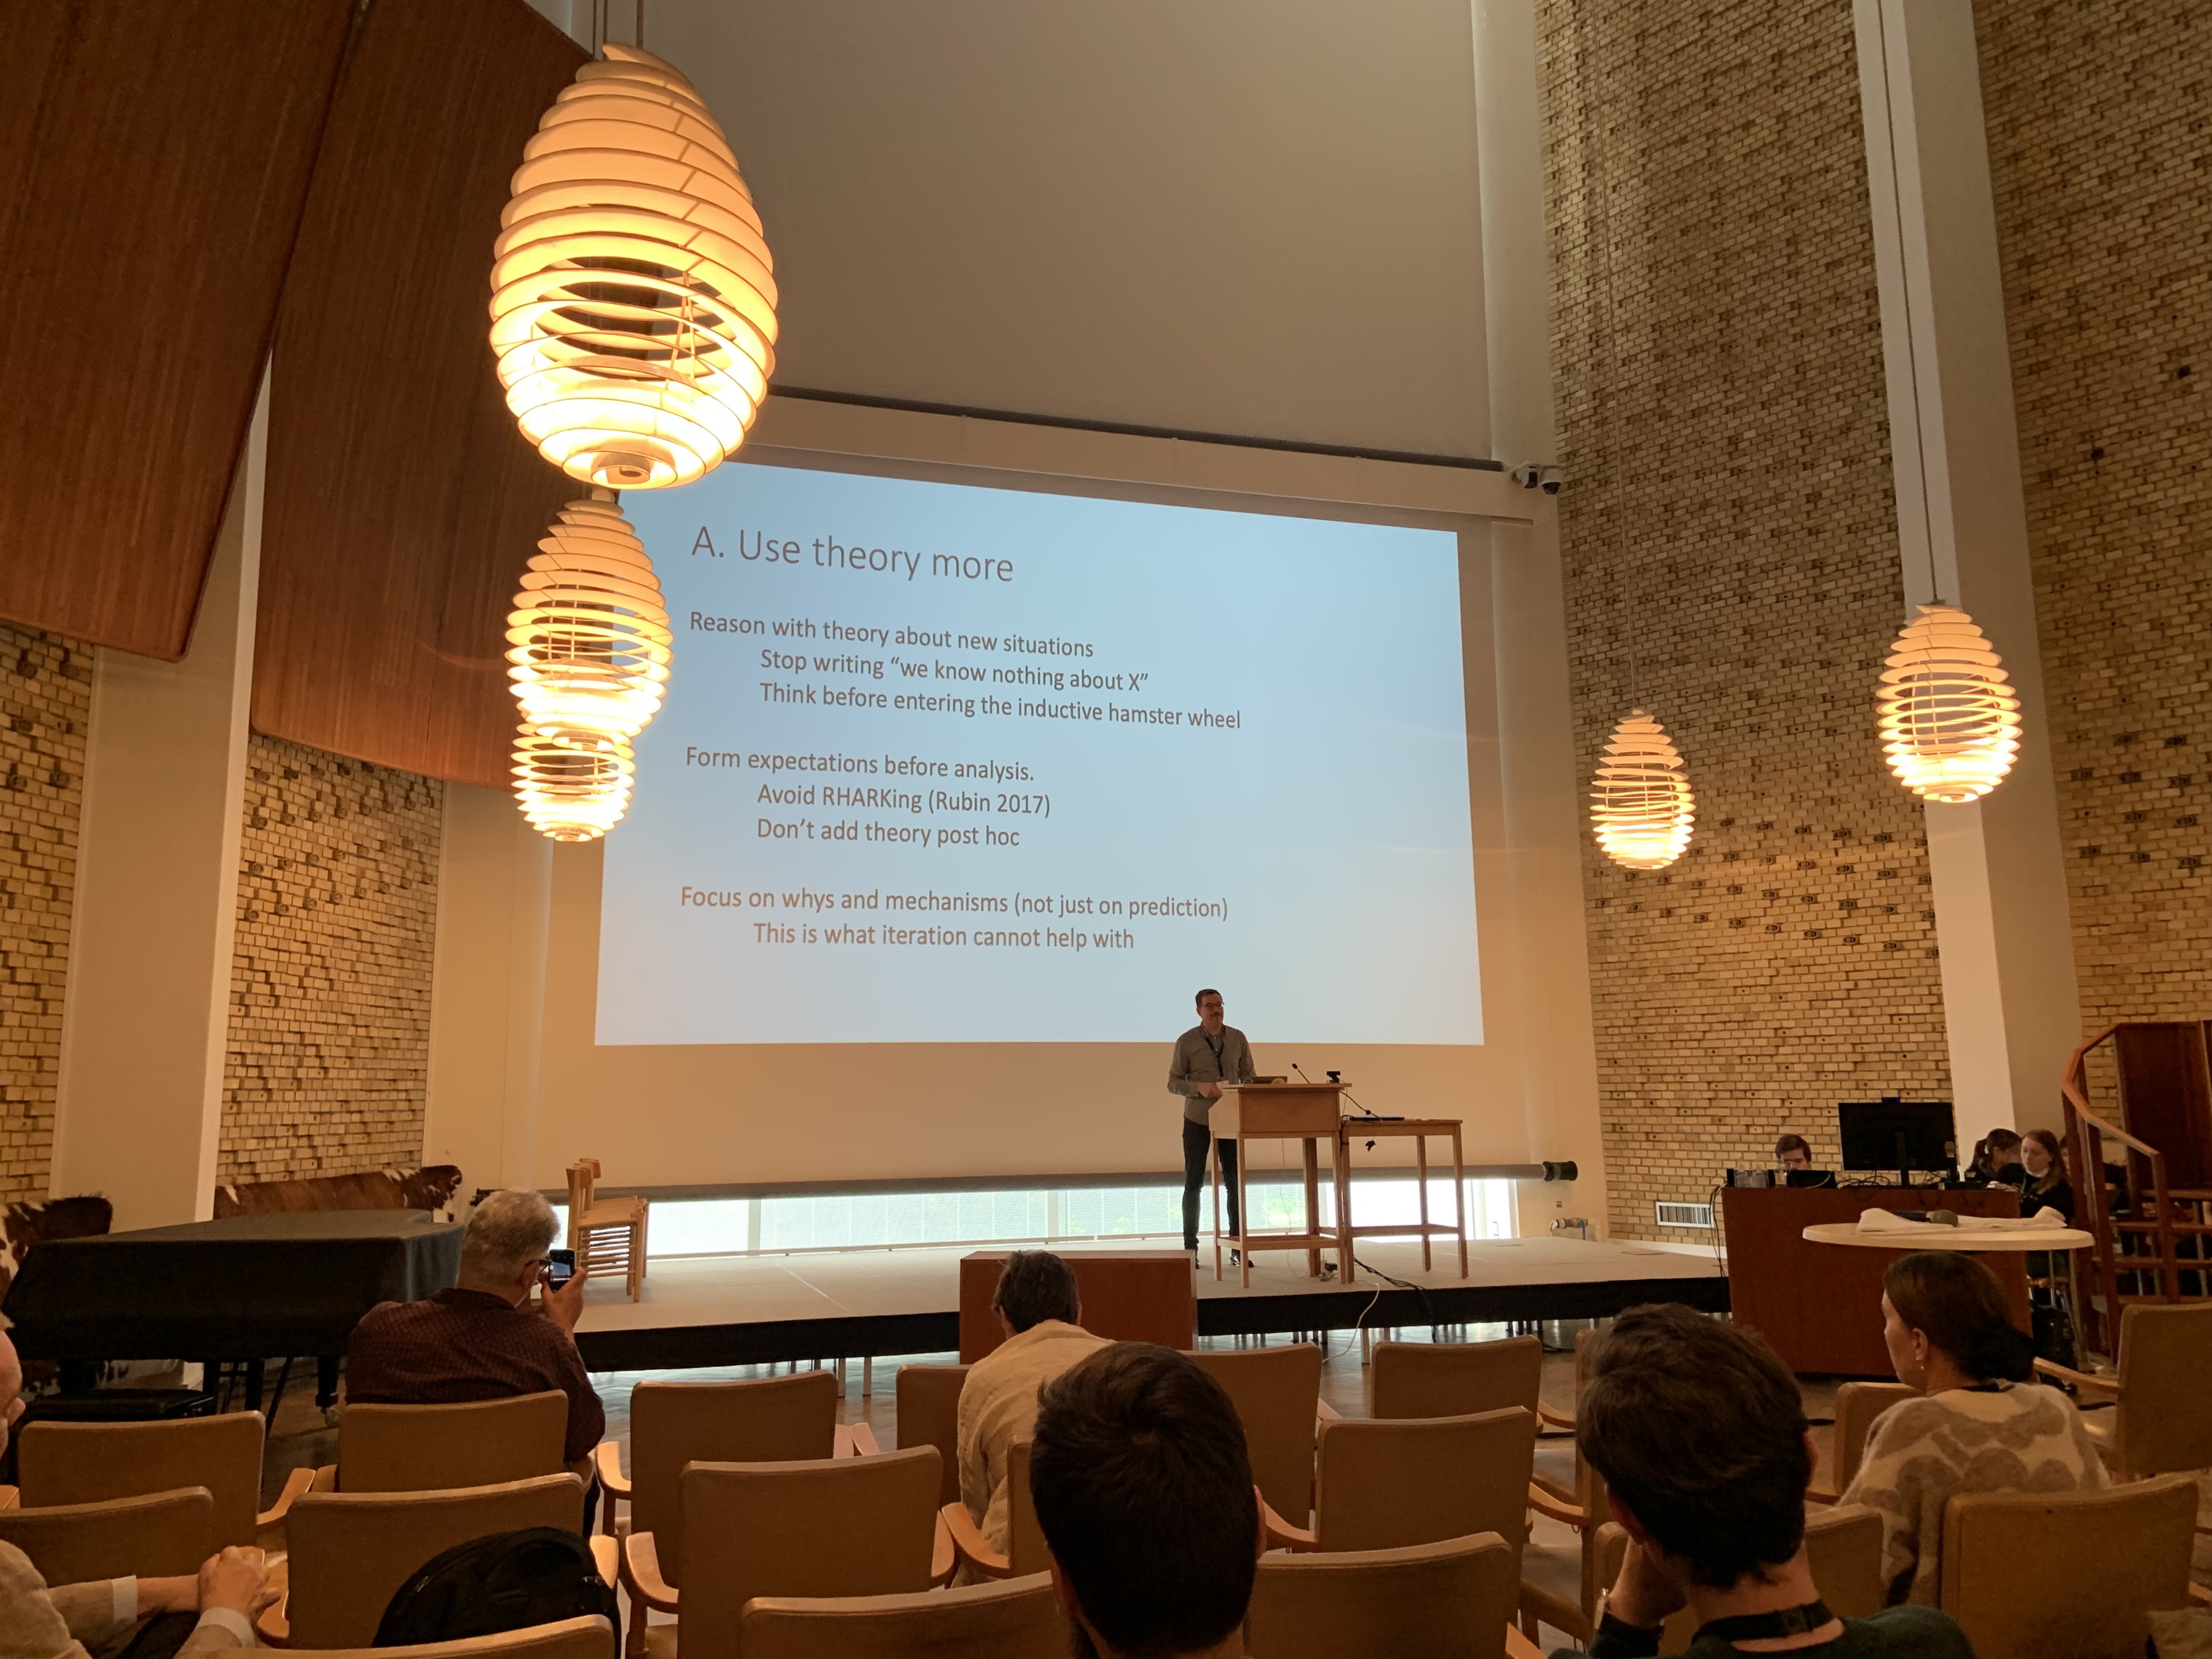 Kasper on stage in the Aarhus University aula, presenting his keynote Implications for Theory.